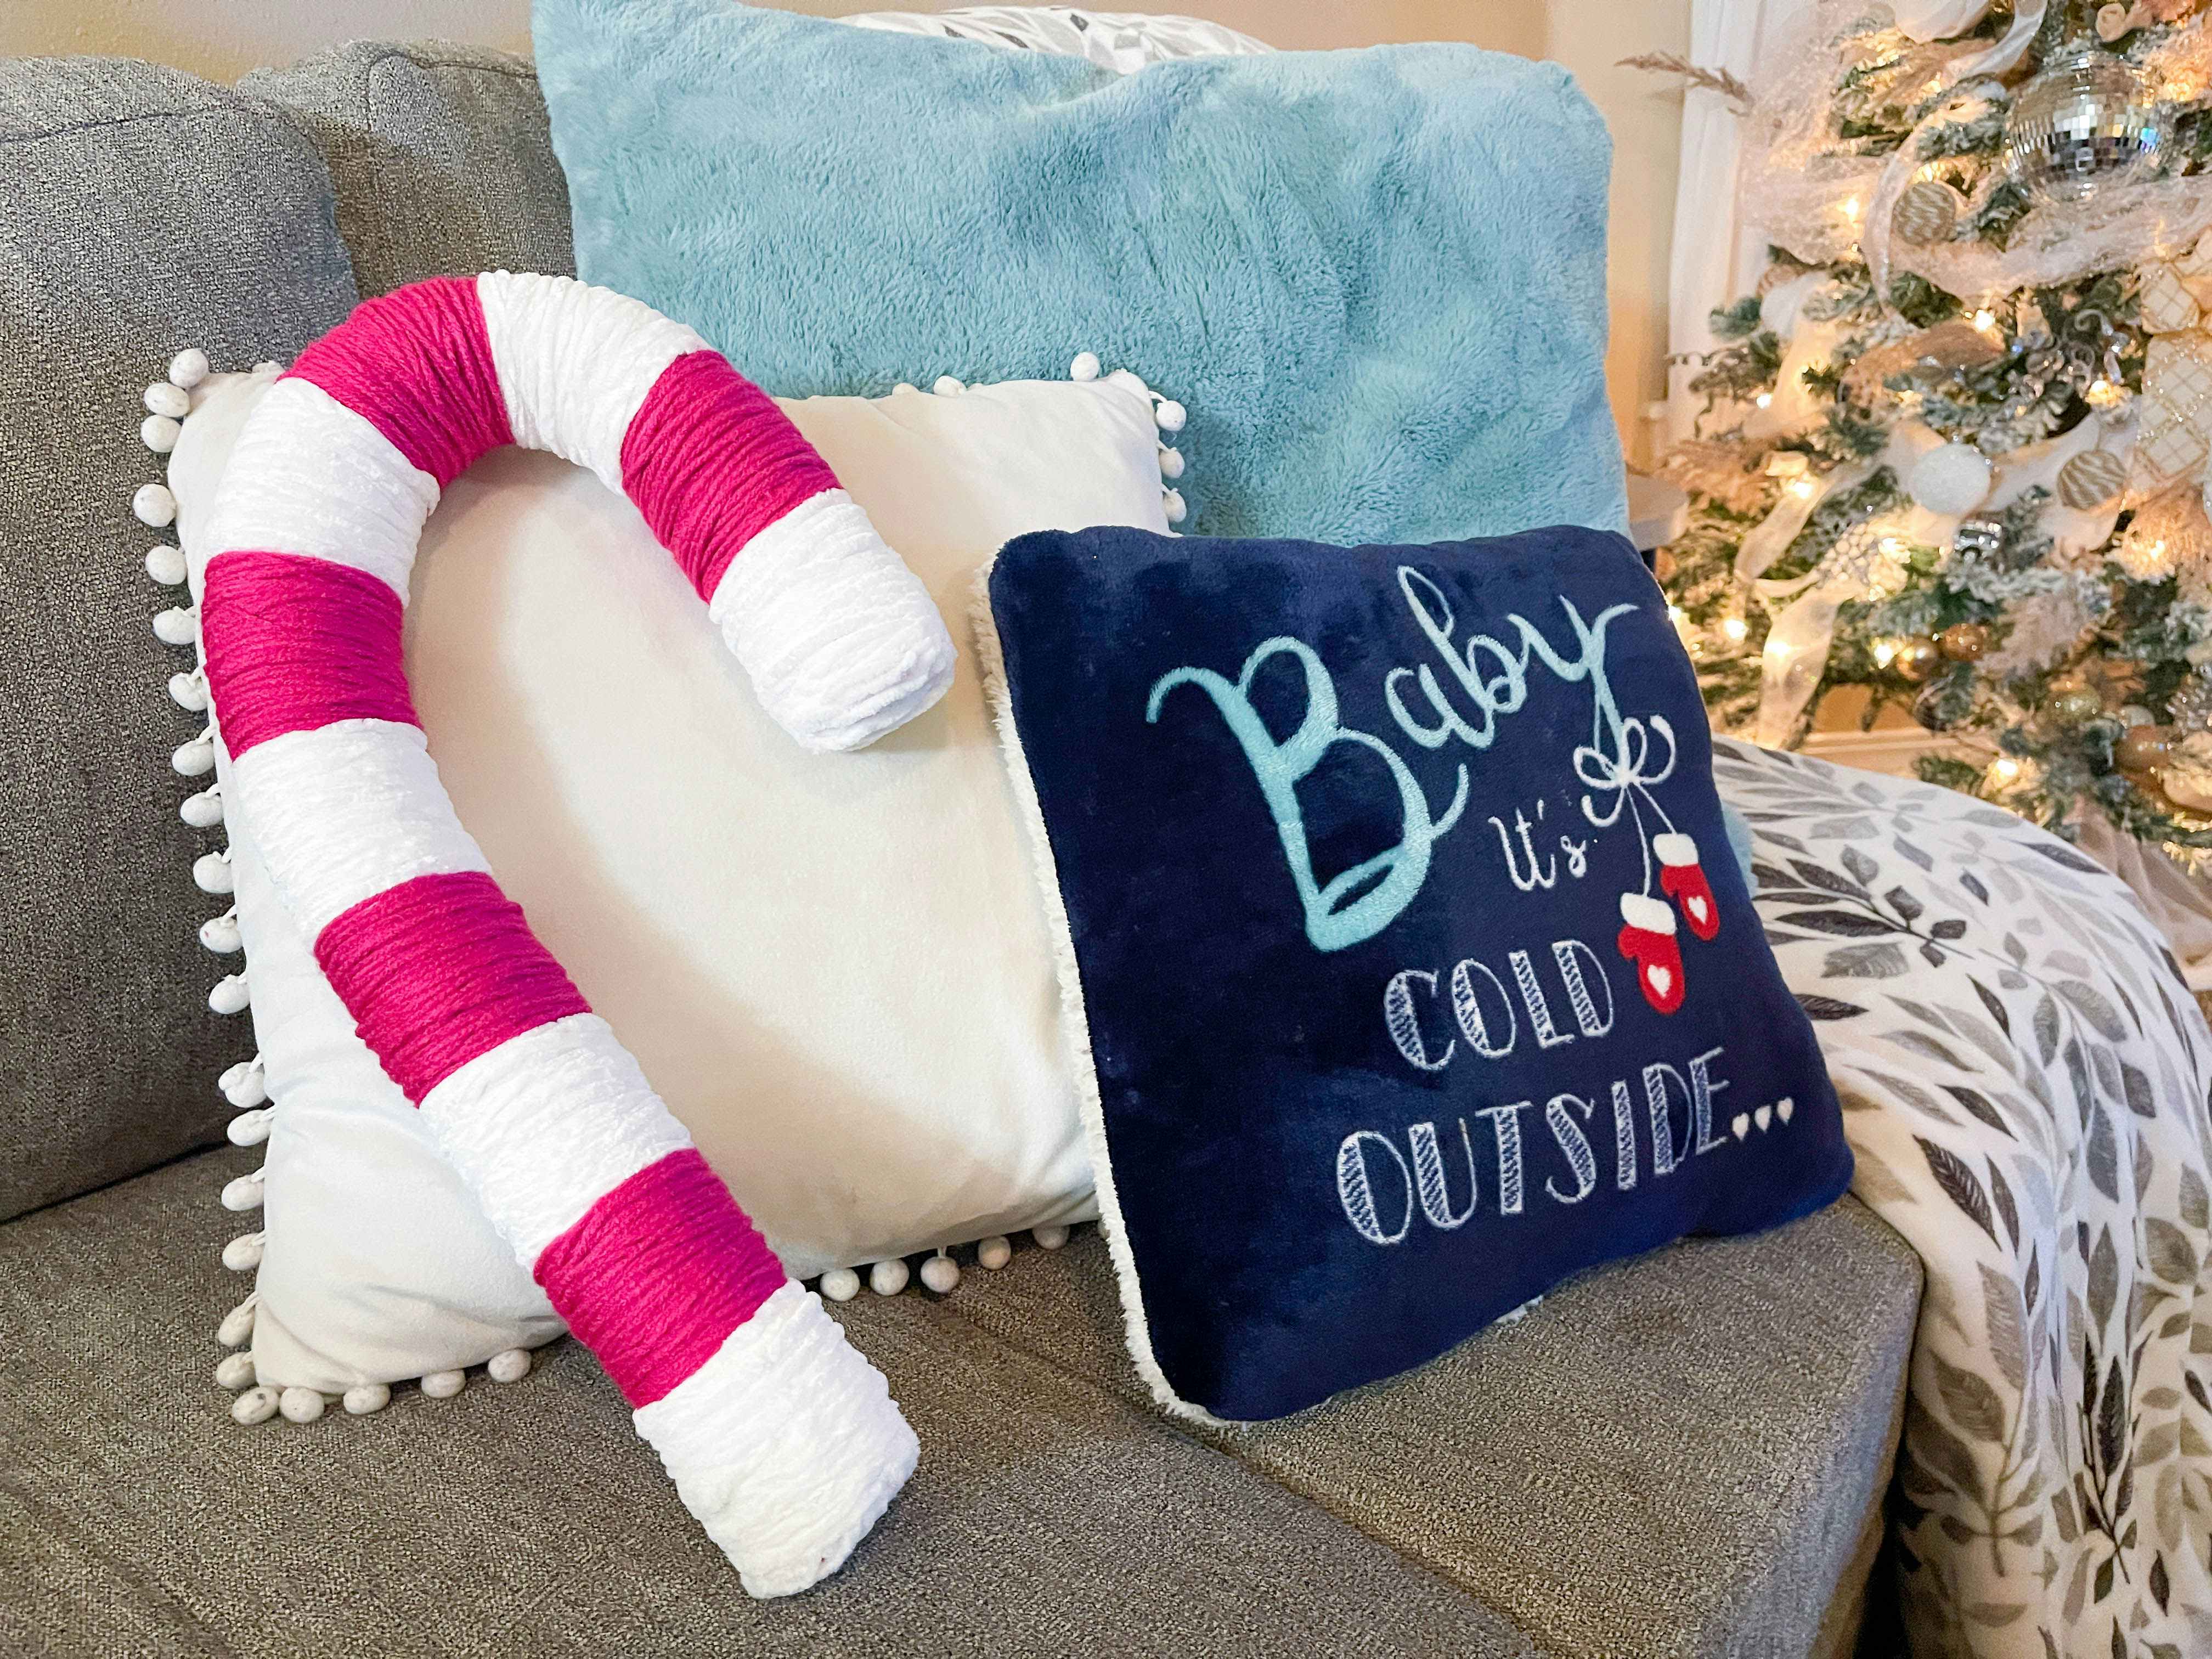 a candy cane pillow made with a pool noodle and pink and white yard 